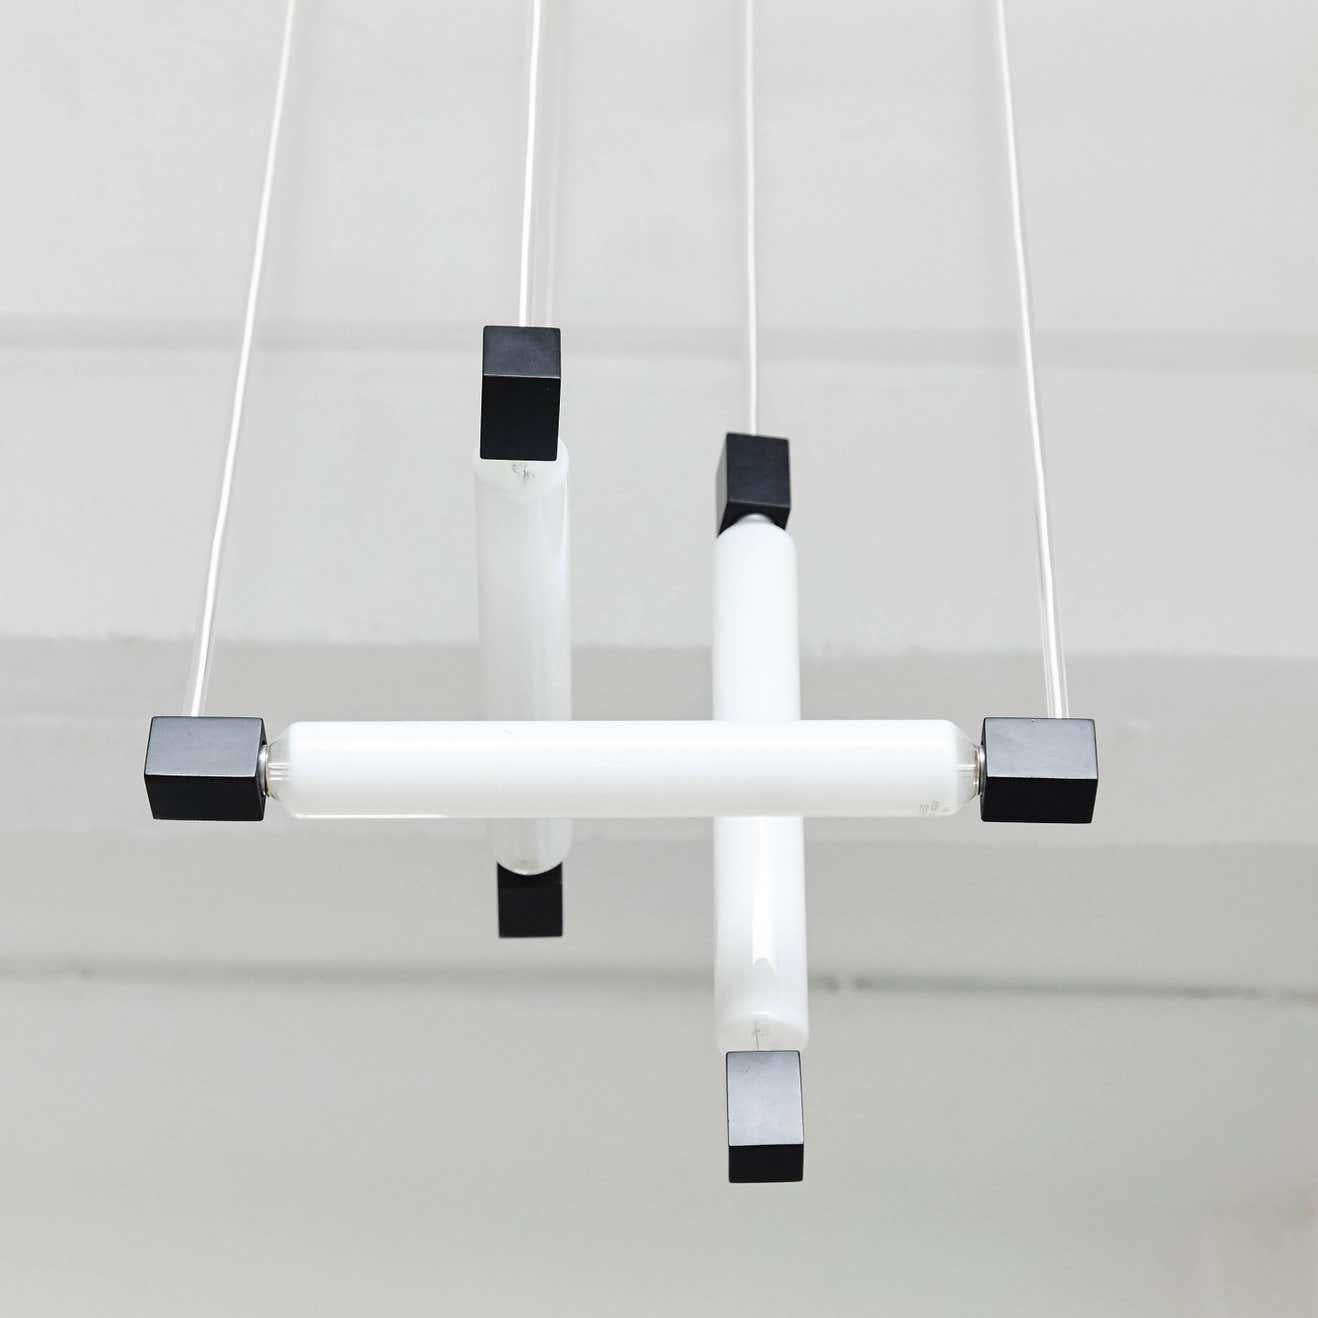 Hanging lamp, designed in the style of Rietveld, executed circa 1960 by unknown manufacturer.
Painted wooden structure and plastic tube protecting the electricity cable, with three bulbs.

In good original condition, with minor wear consistent